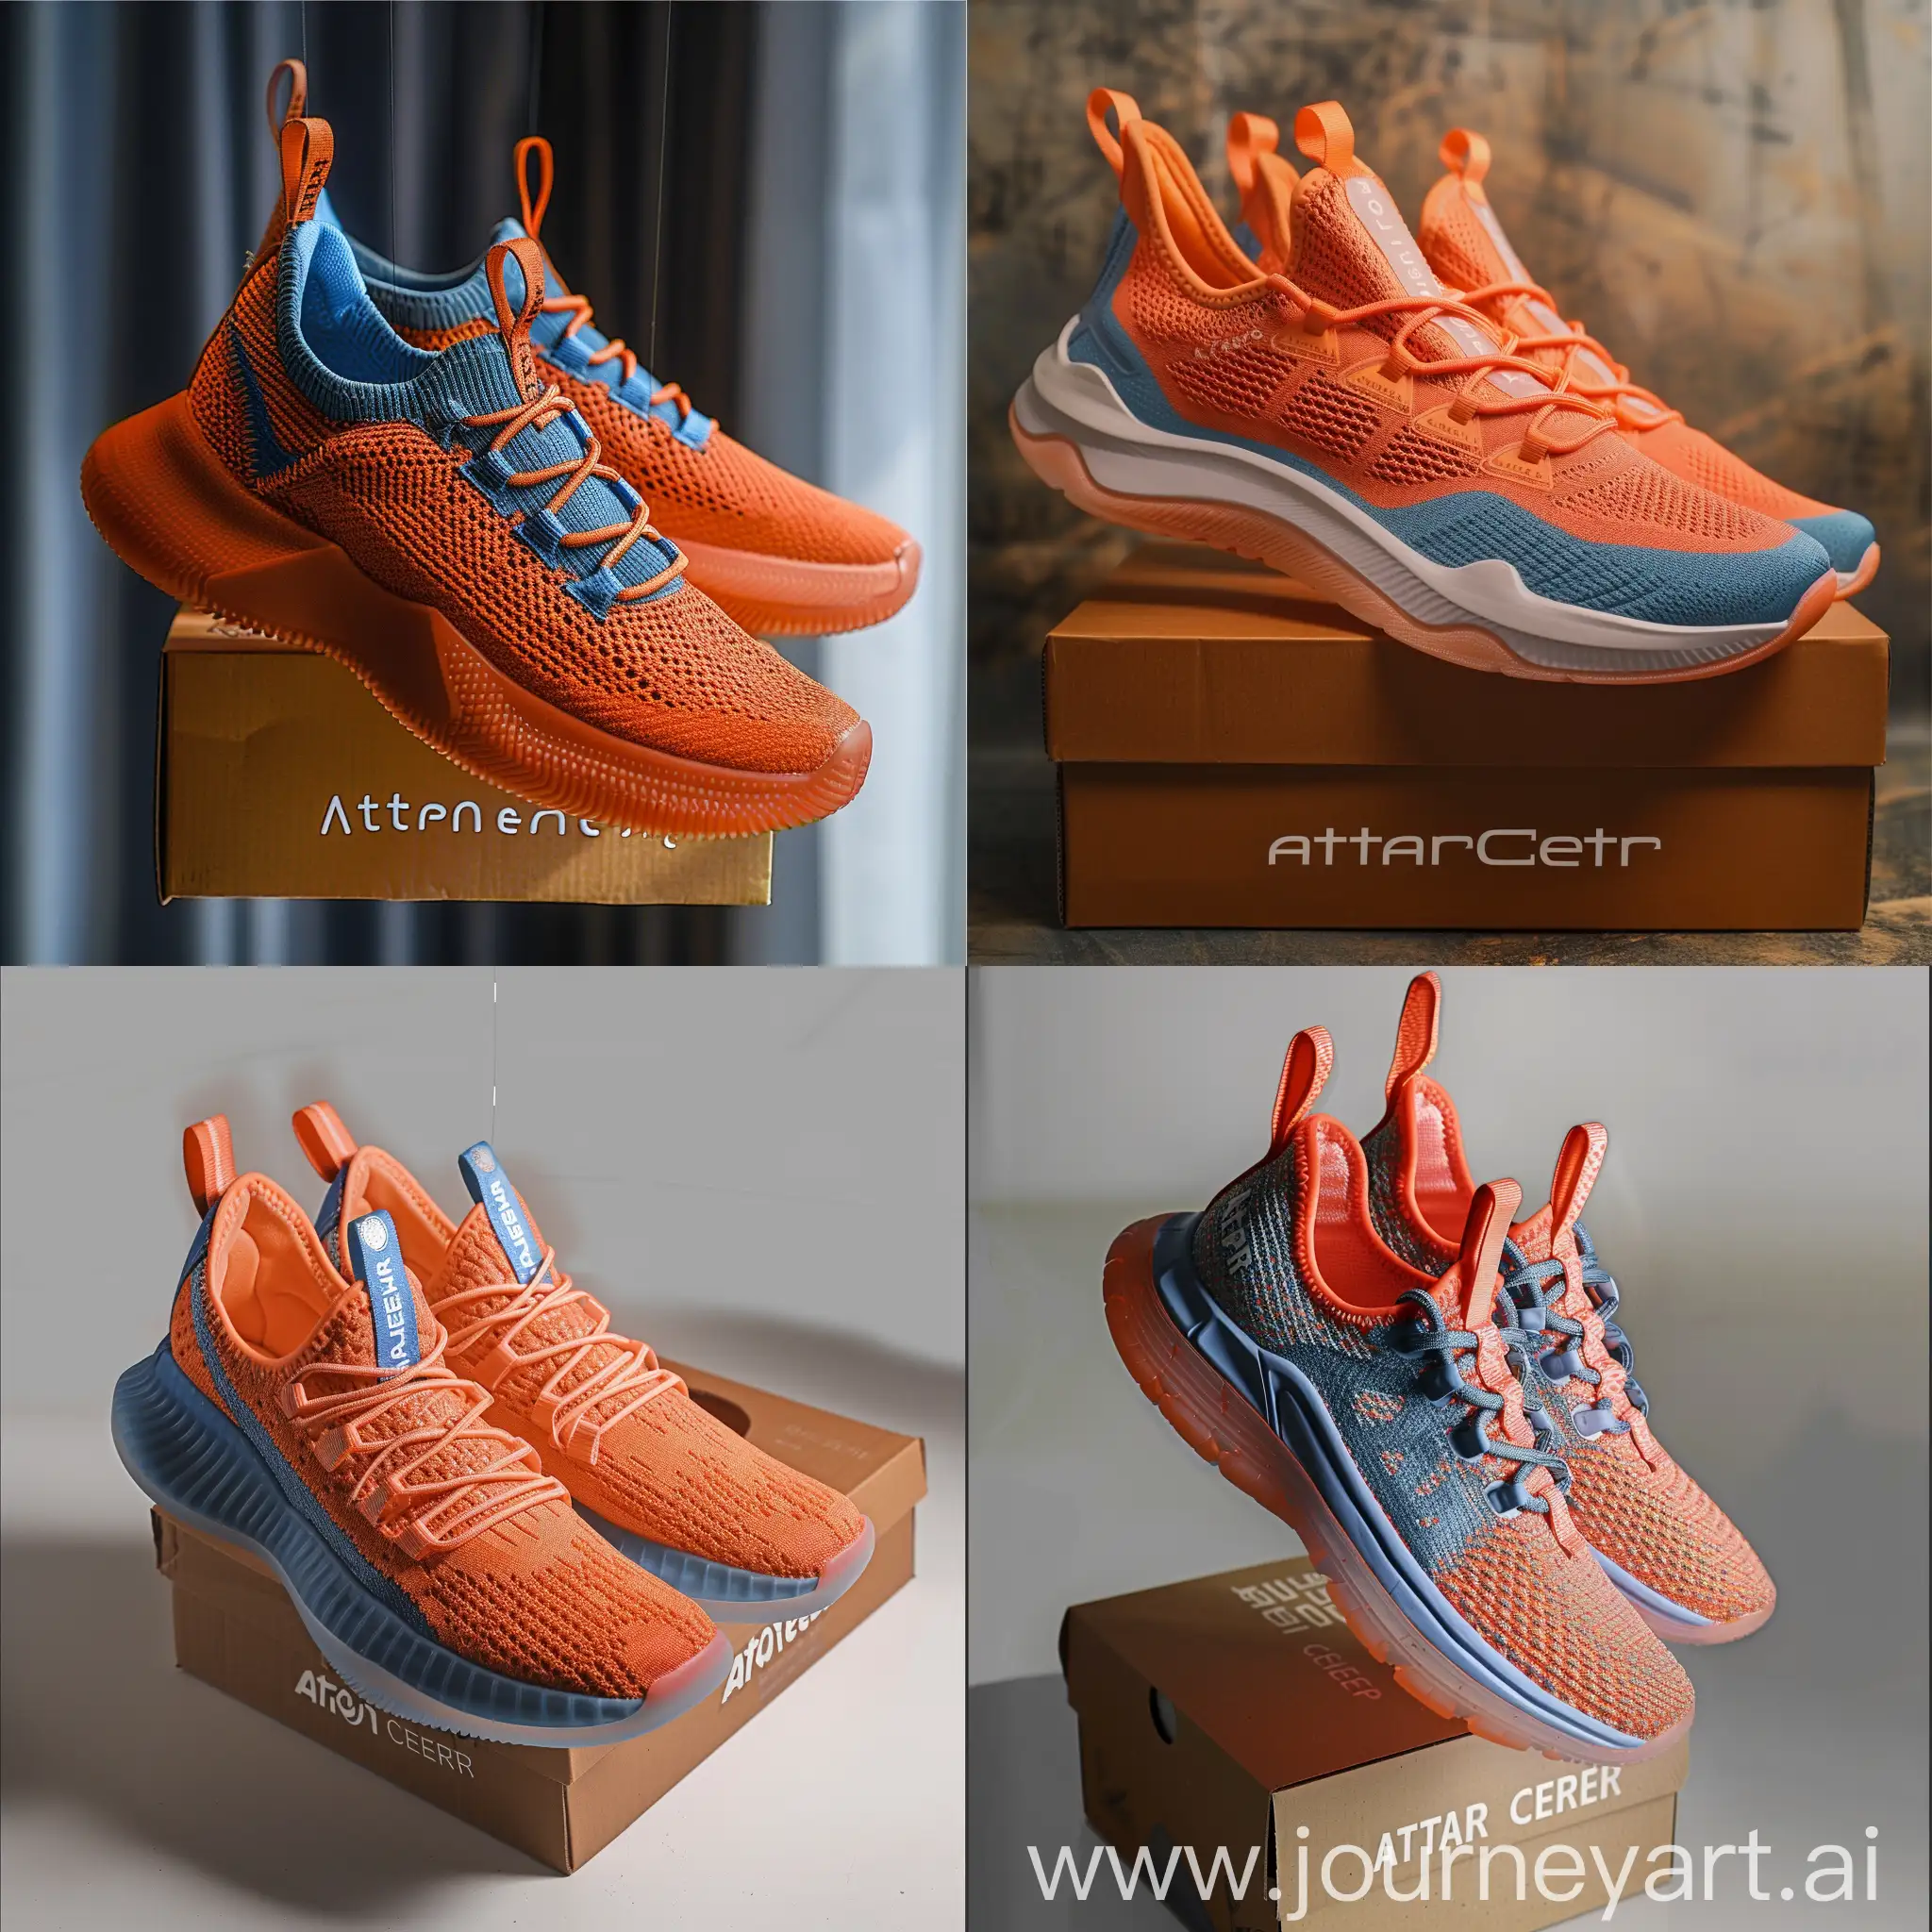 A pair of orange-blue sports shoes with a white background that is suspended in the air and on a brown cardboard box, the Attar Center brand name is clearly engraved in white.